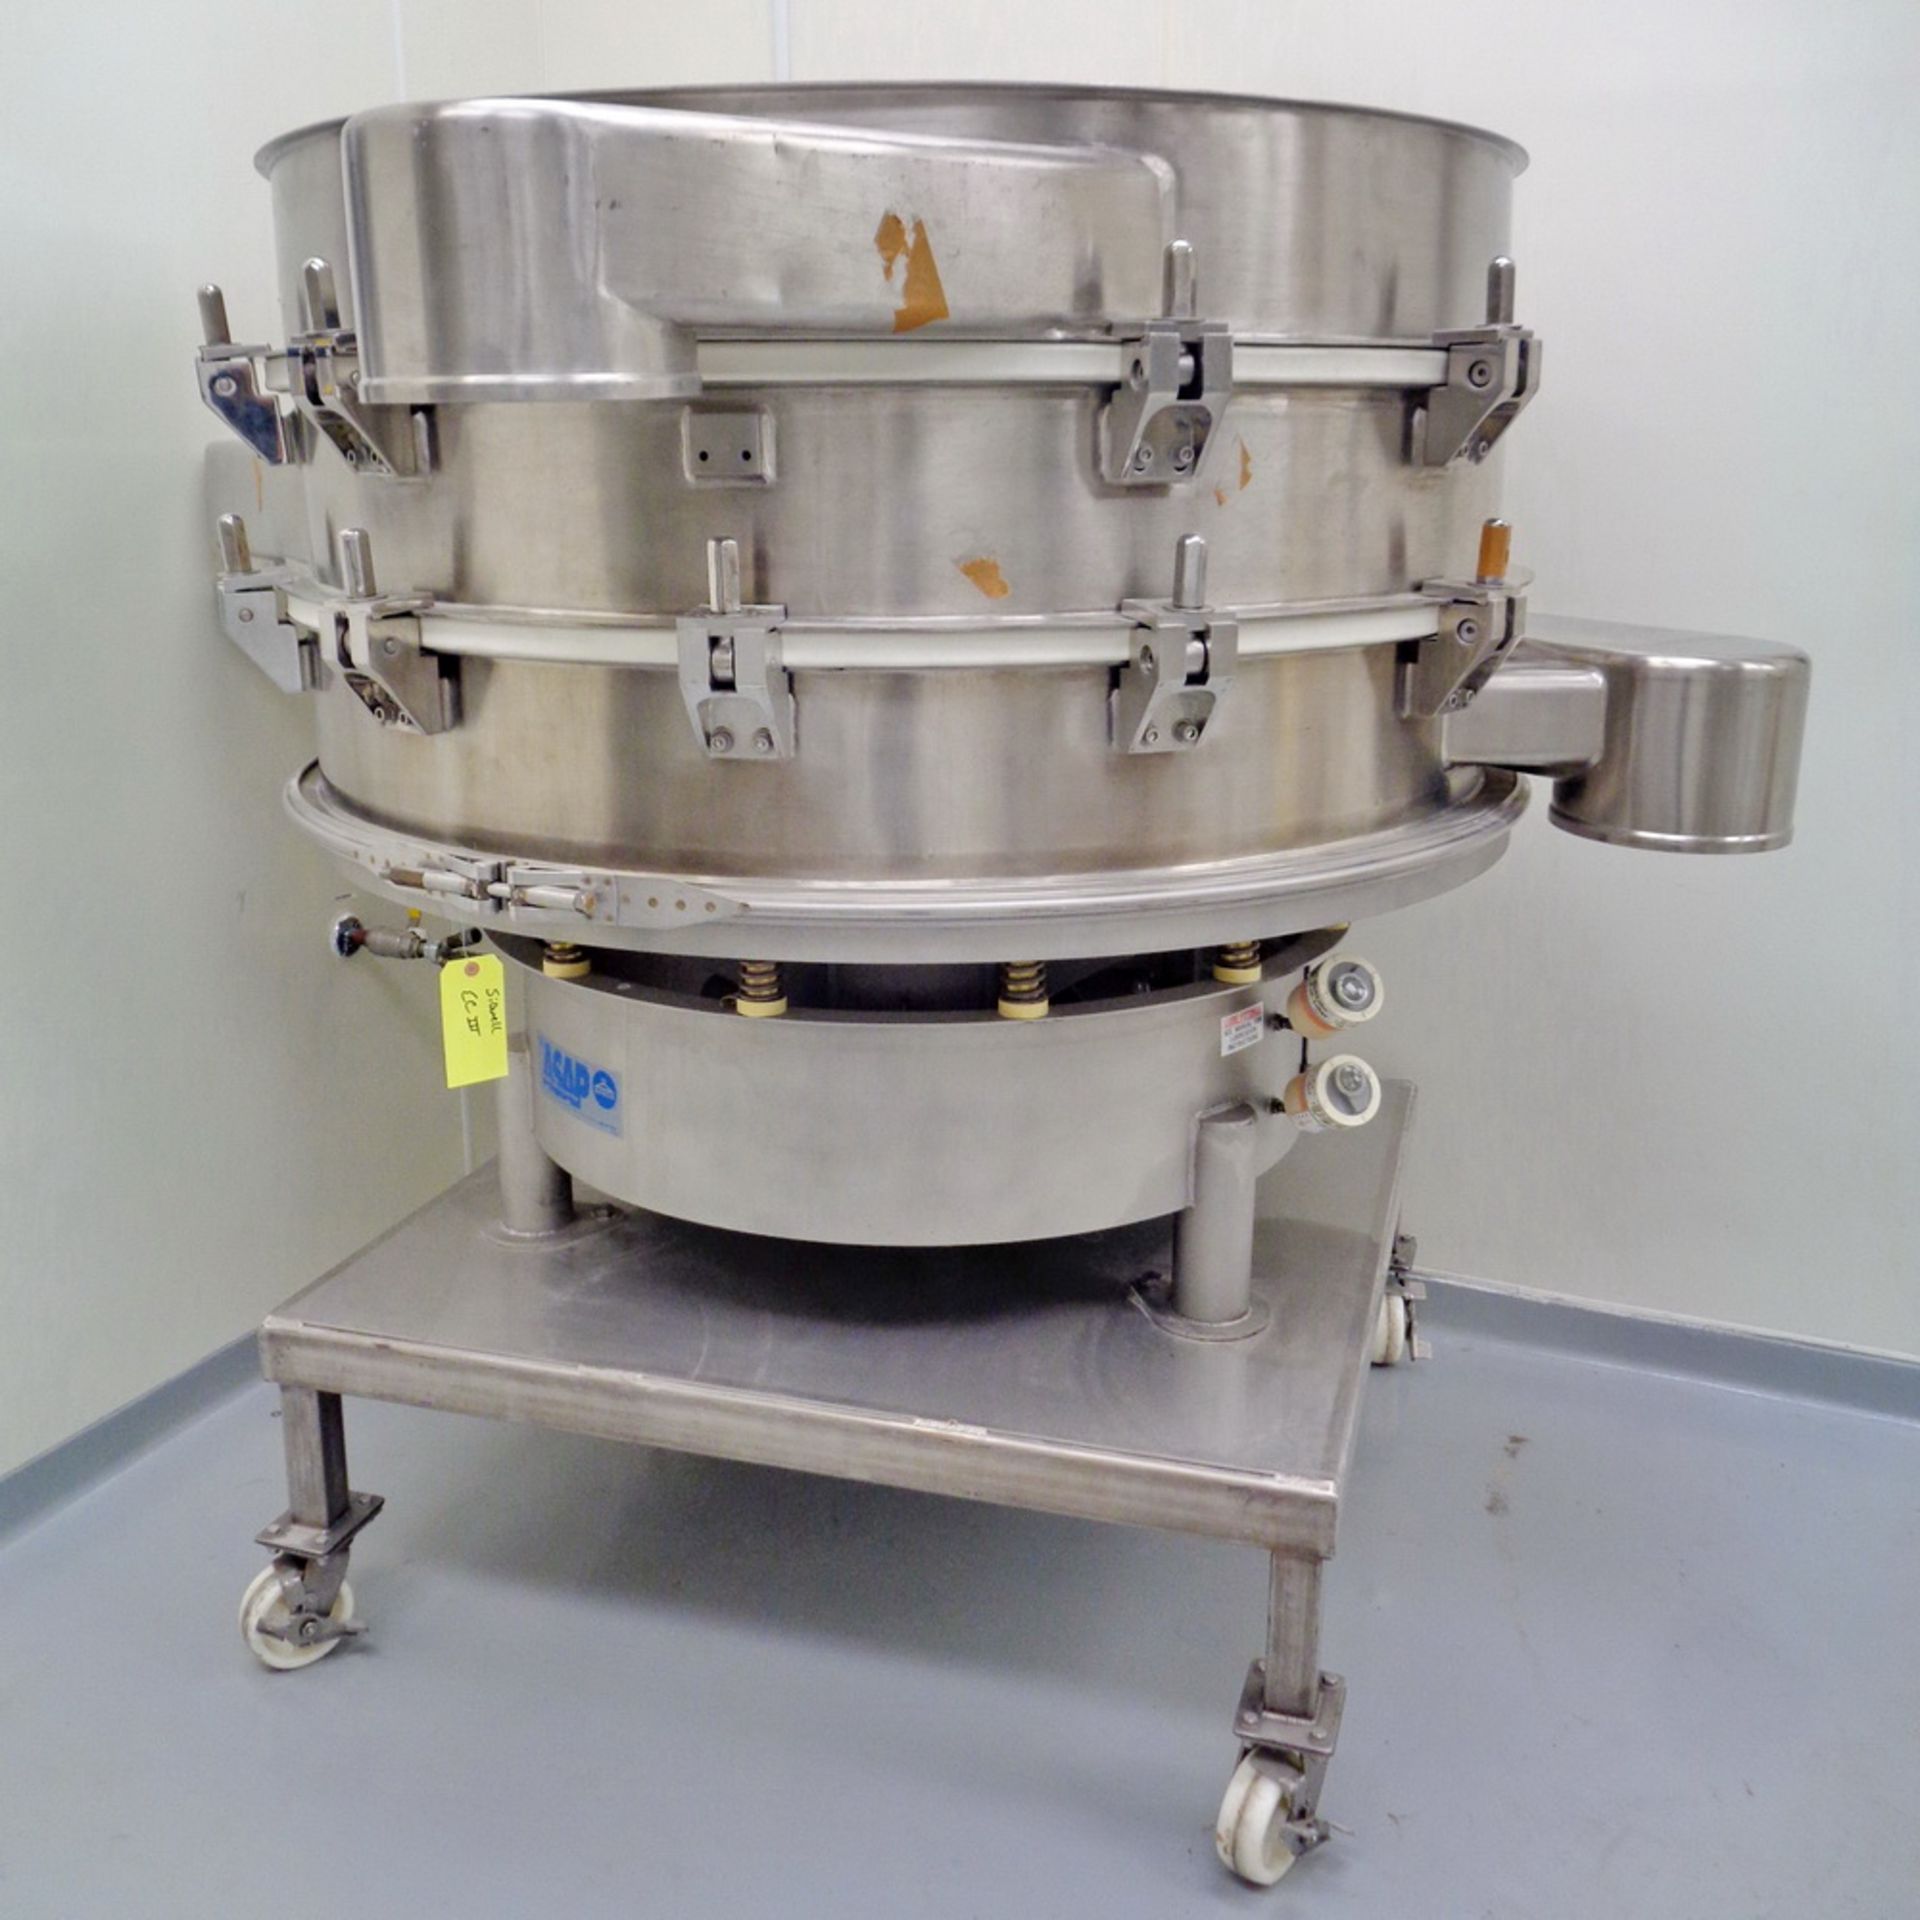 Sweco Stainless Steel 60" Sifter, Model SS60Y88A3P4SASDTLWC, S/N 323718-A05/06